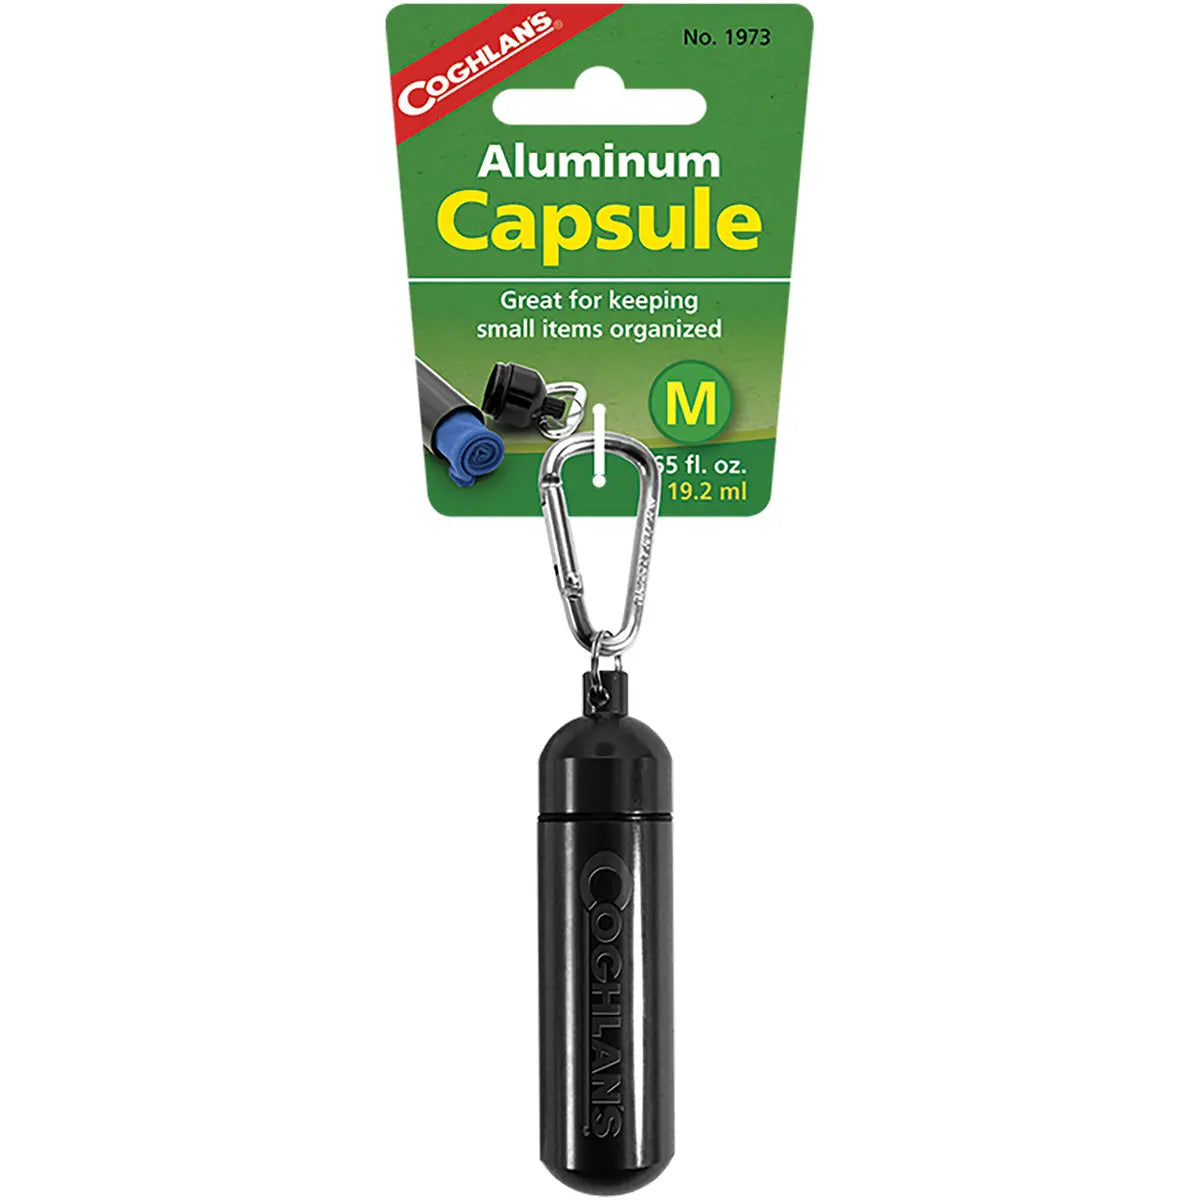 Coghlan's Aluminum Capsule with Carabiner, Watertight Seal, Container Storage Coghlan's